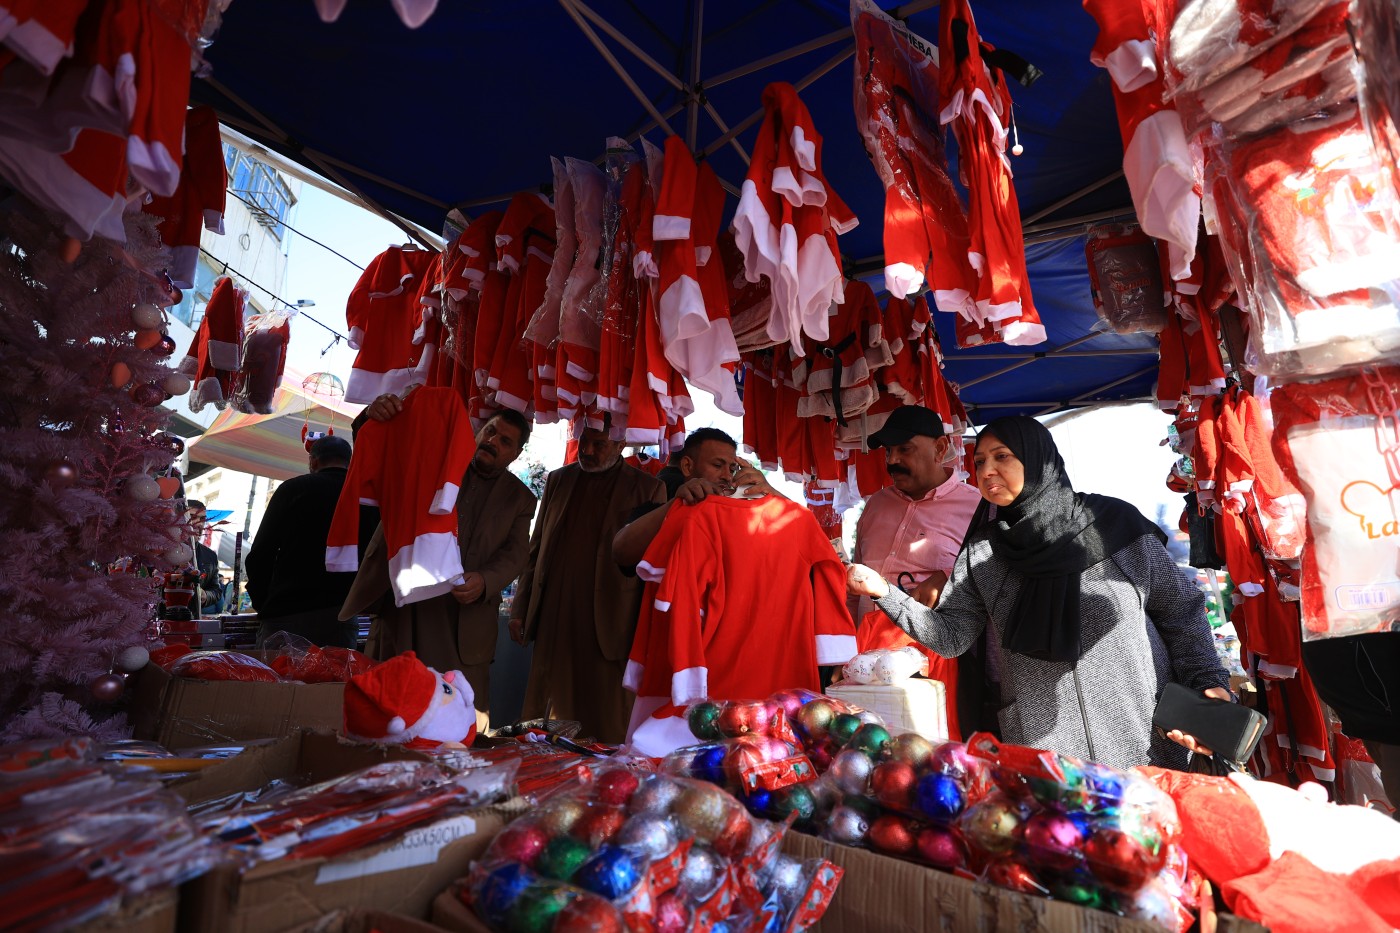 Image of New Year's preparations in Baghdad: Festive shopping at Shorja market